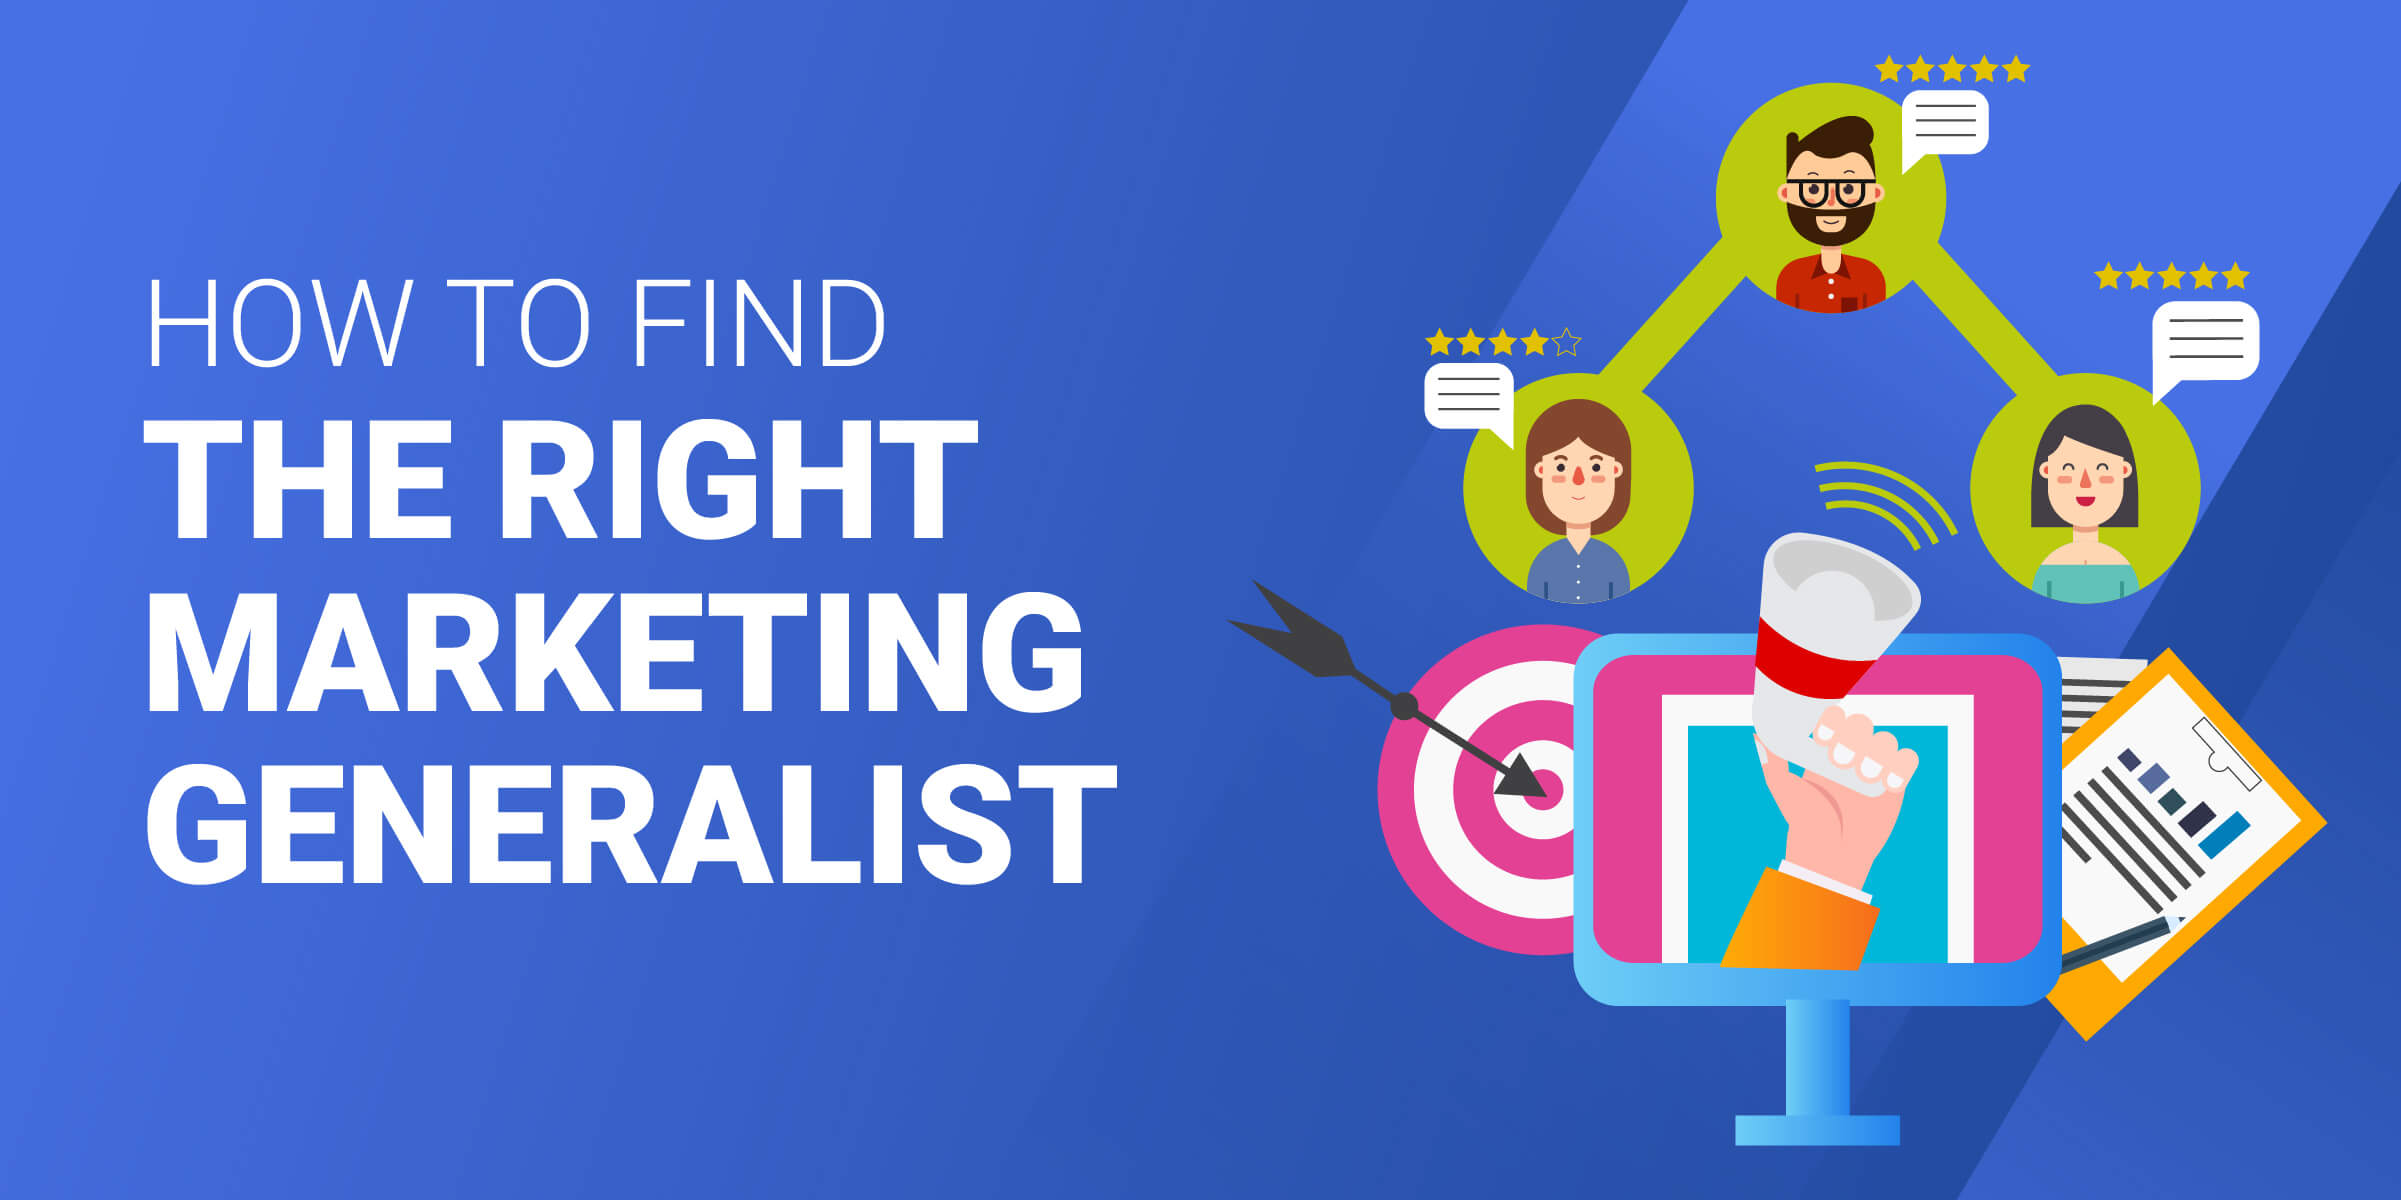 How to Find the Right Marketing Generalist